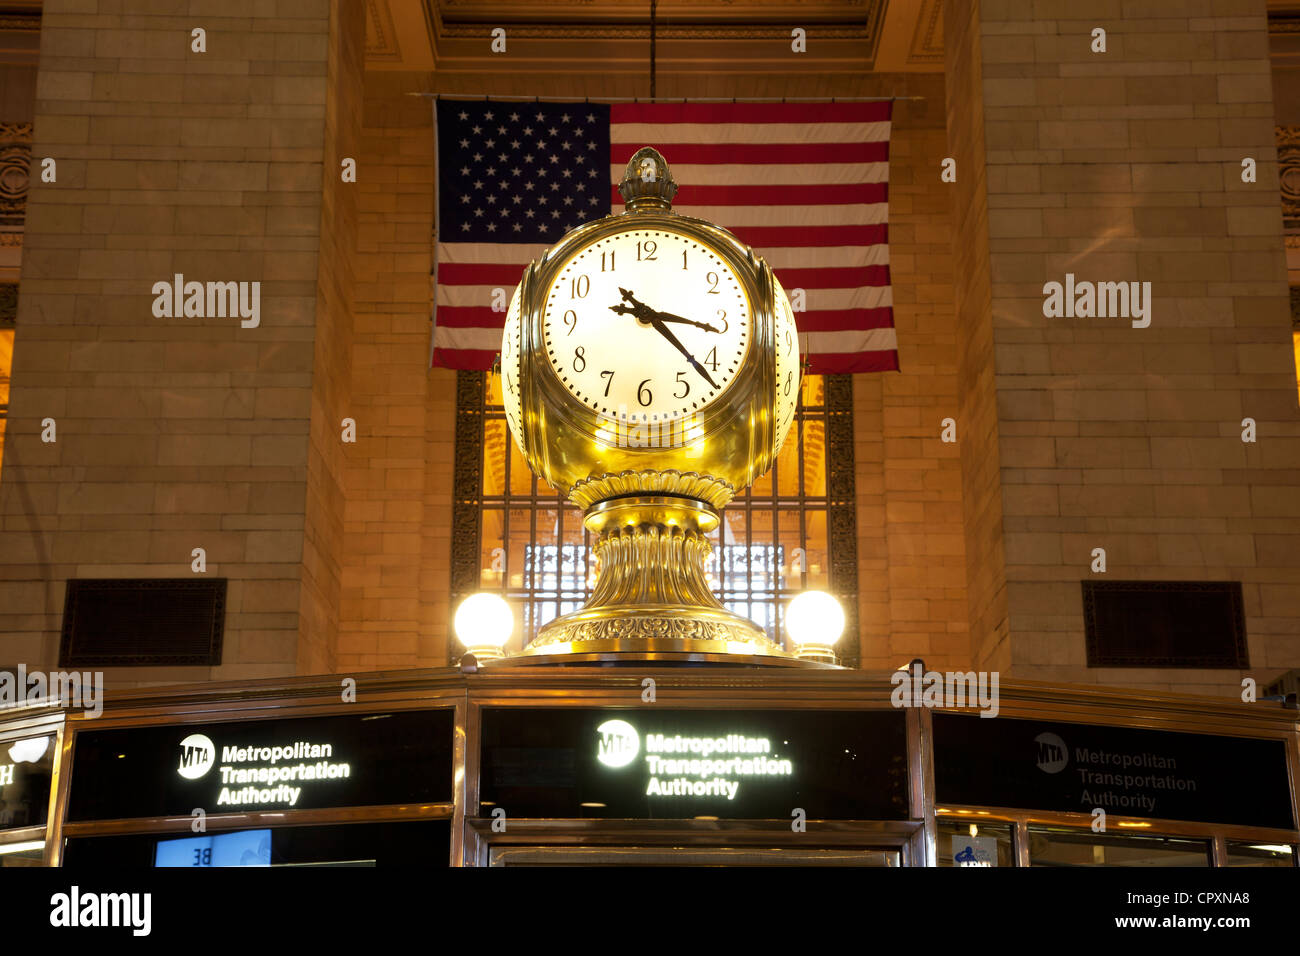 The clock in Grand Central Terminal, New York City Stock Photo